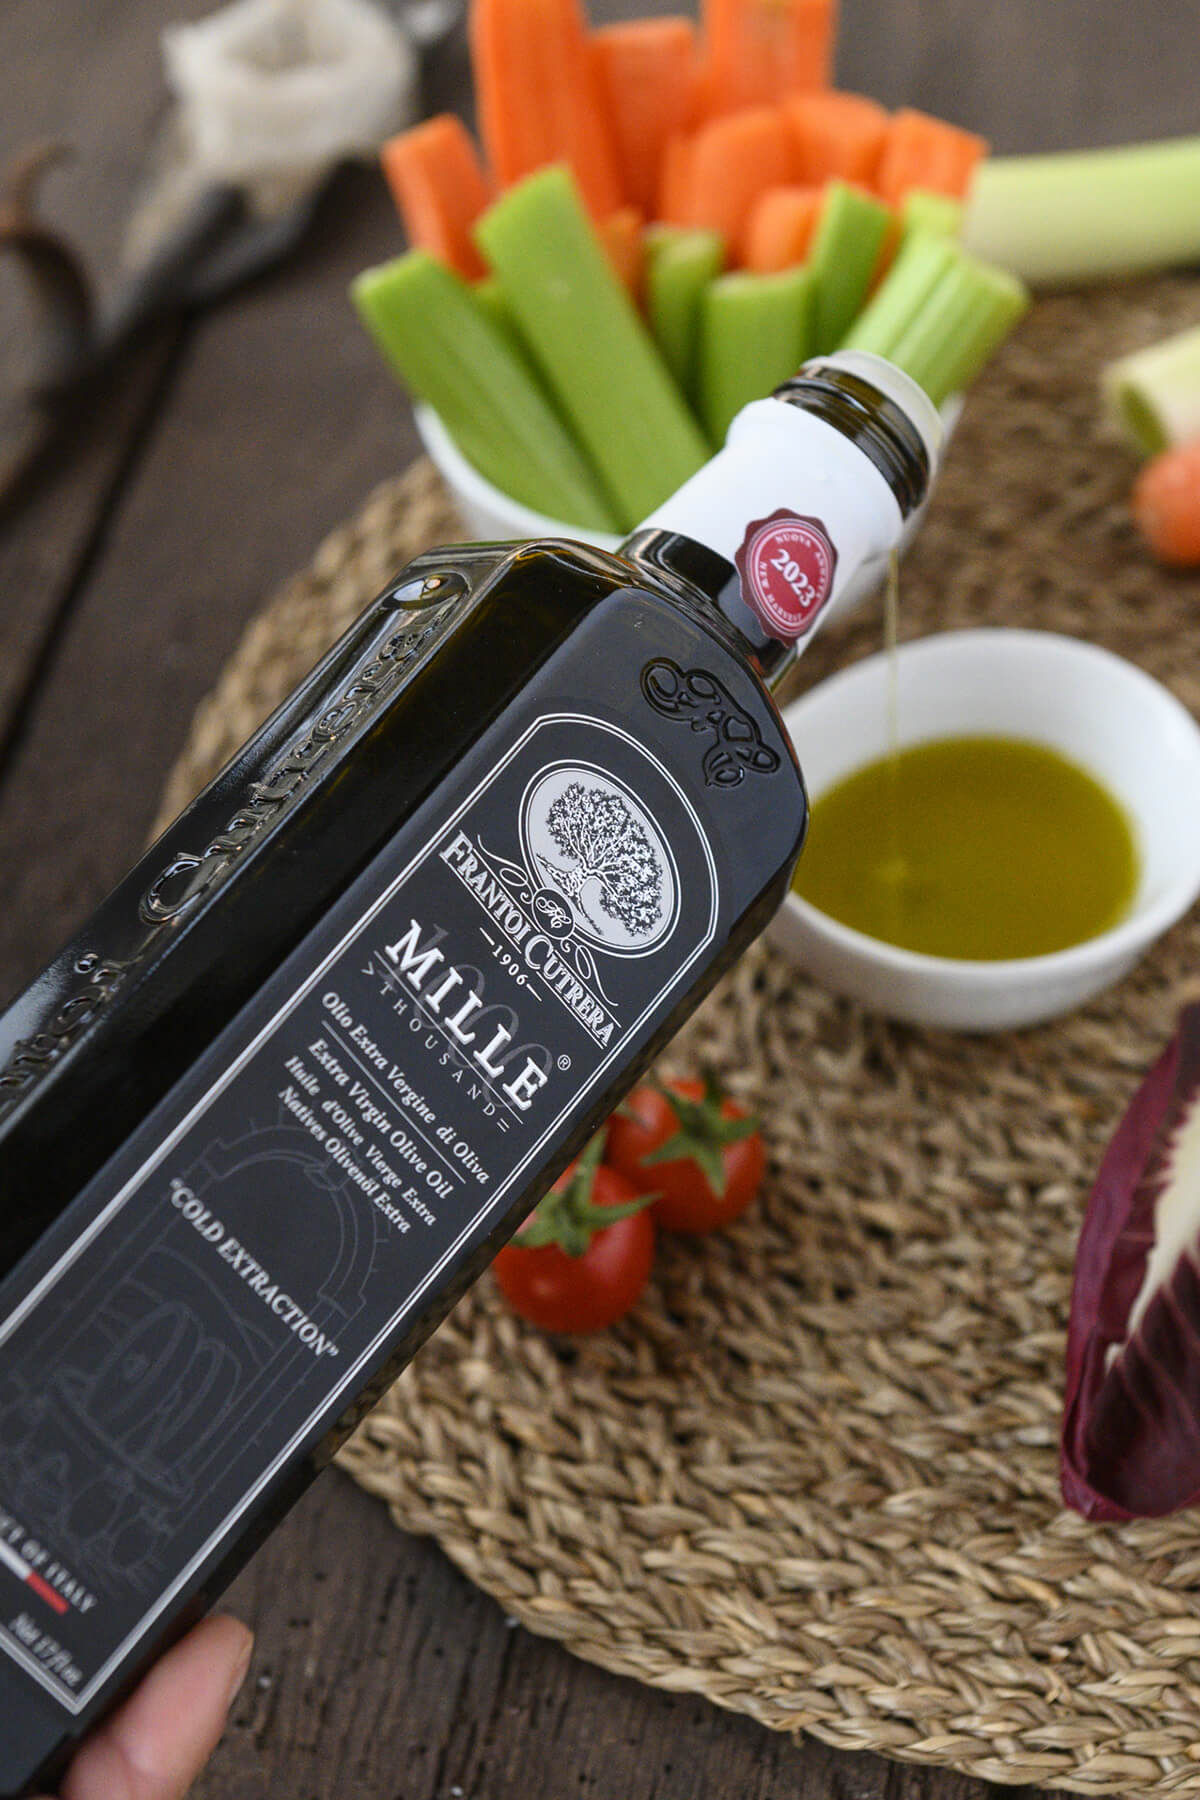 Mille - Extra virgin olive oil from wild wild olive